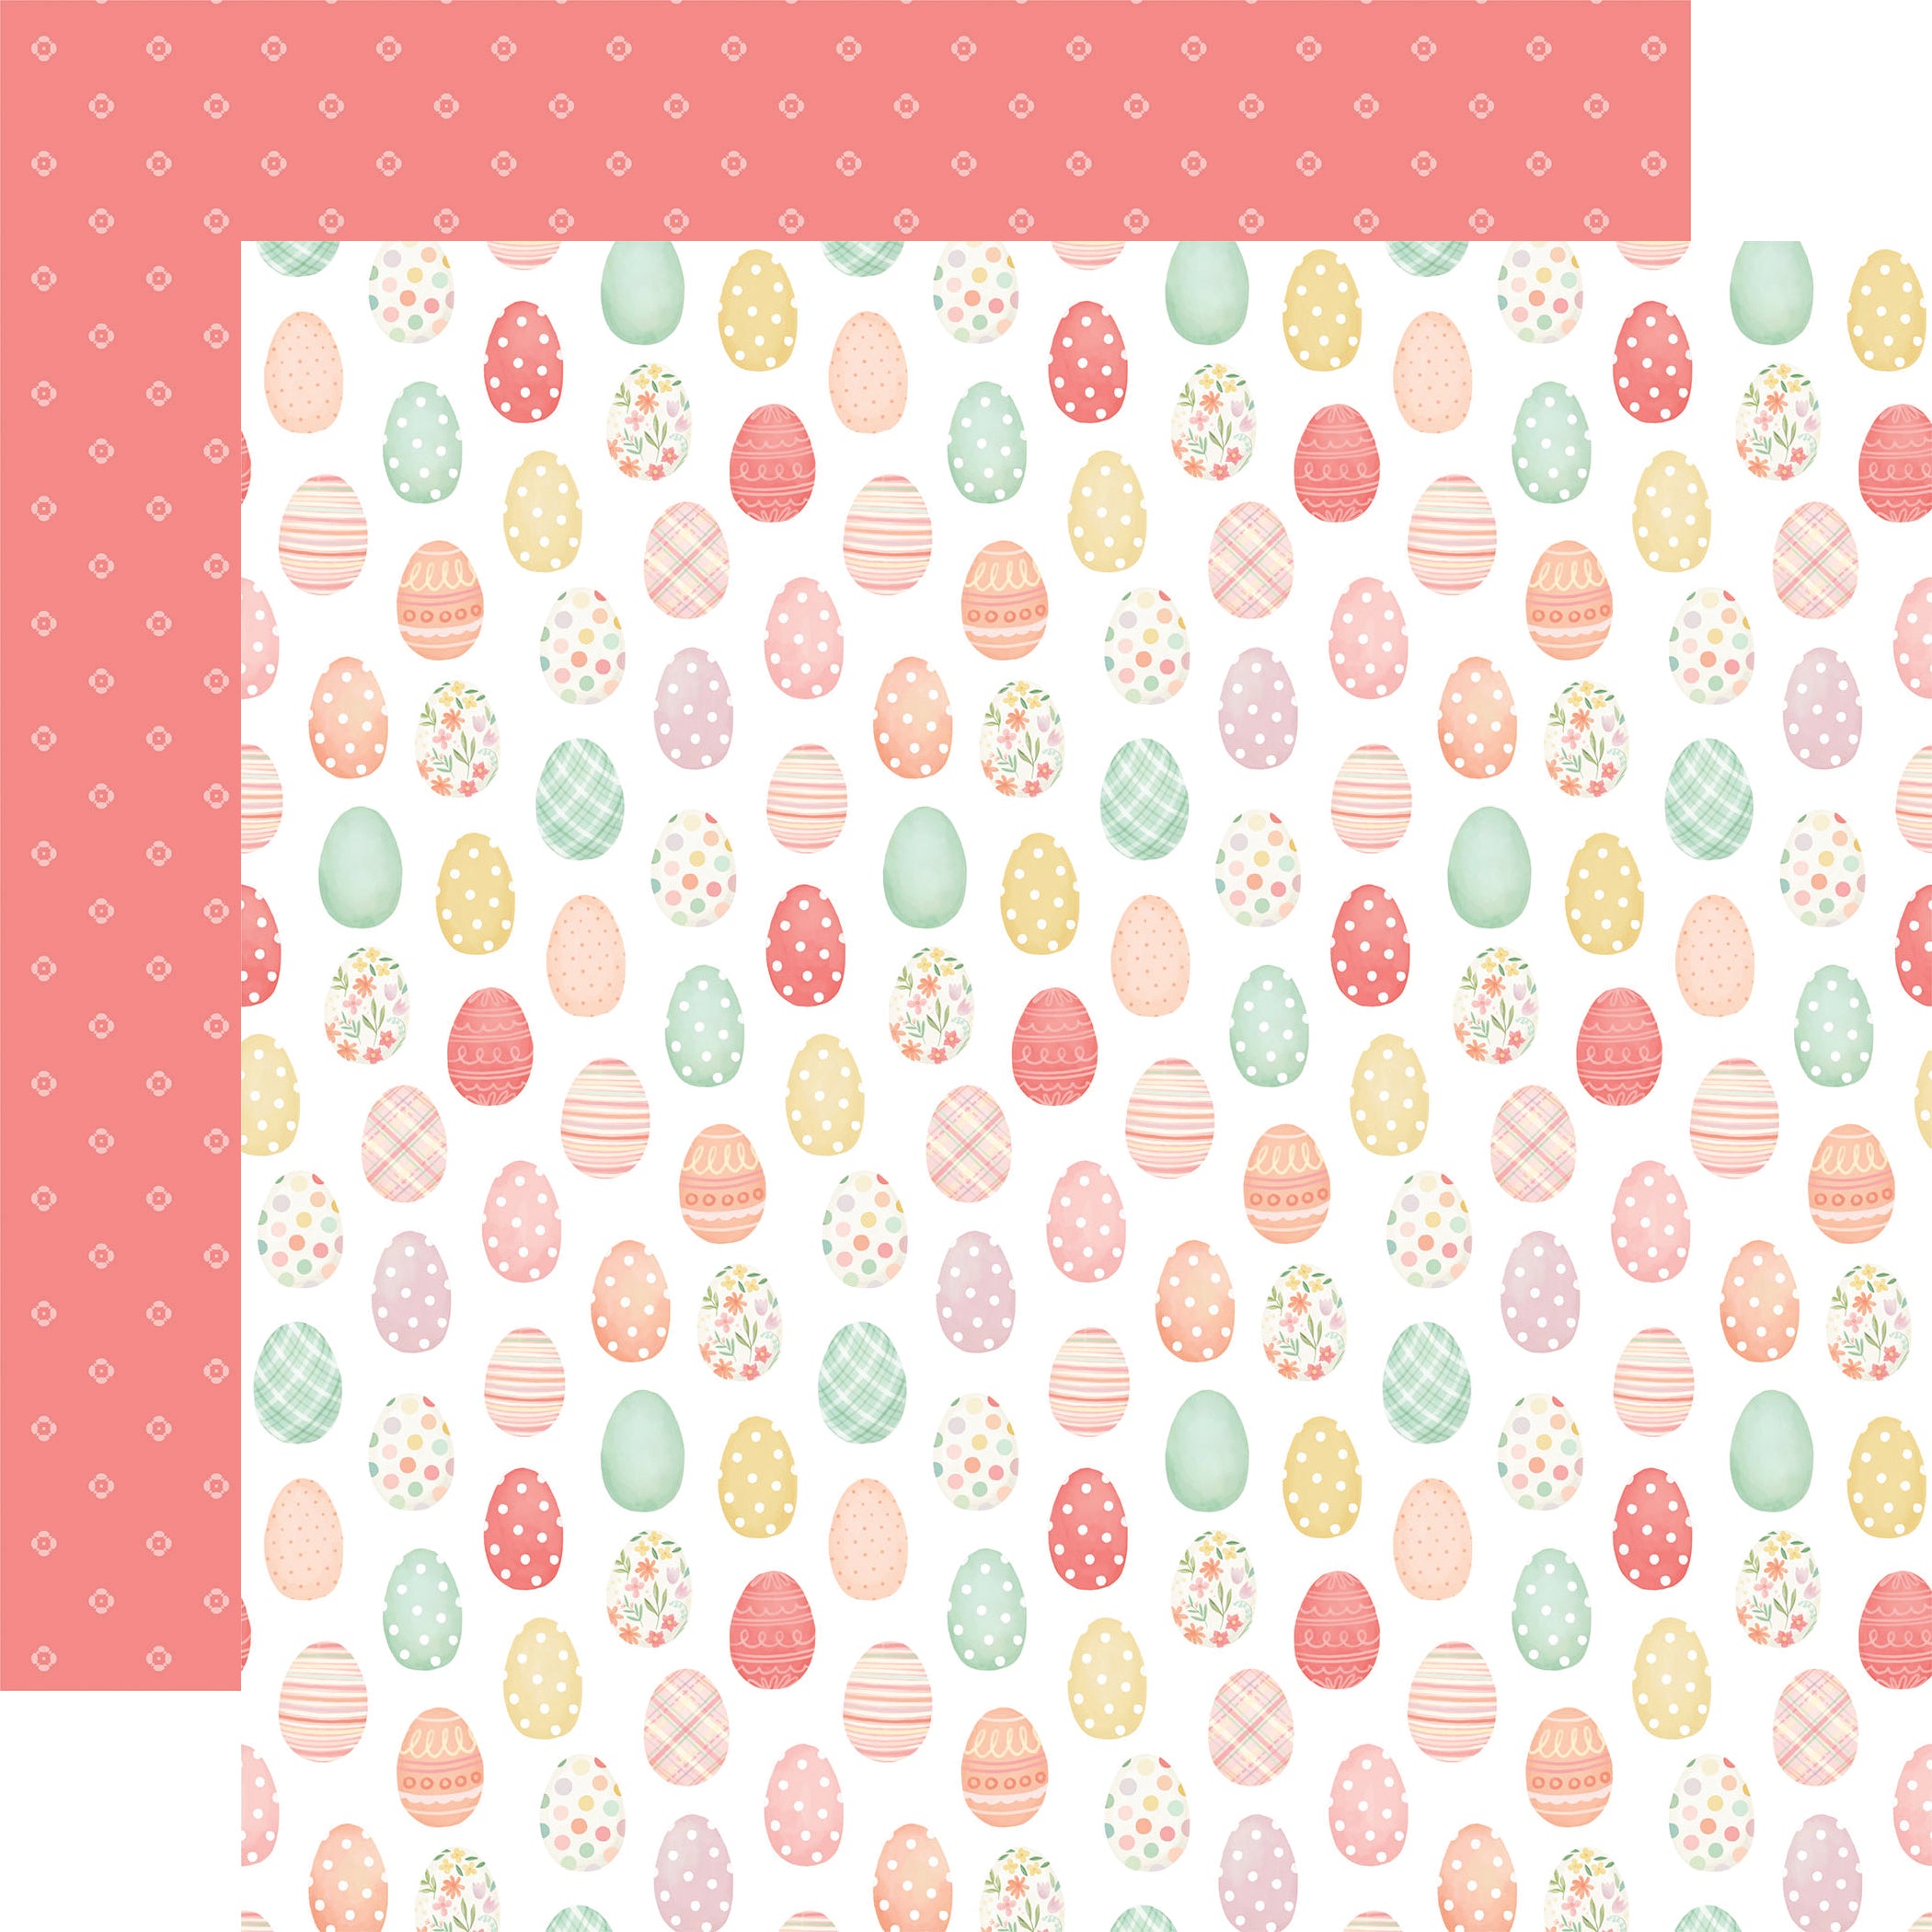 Here Comes Easter Collection So Egg-Cited 12 x 12 Double-Sided Scrapbook Paper by Carta Bella